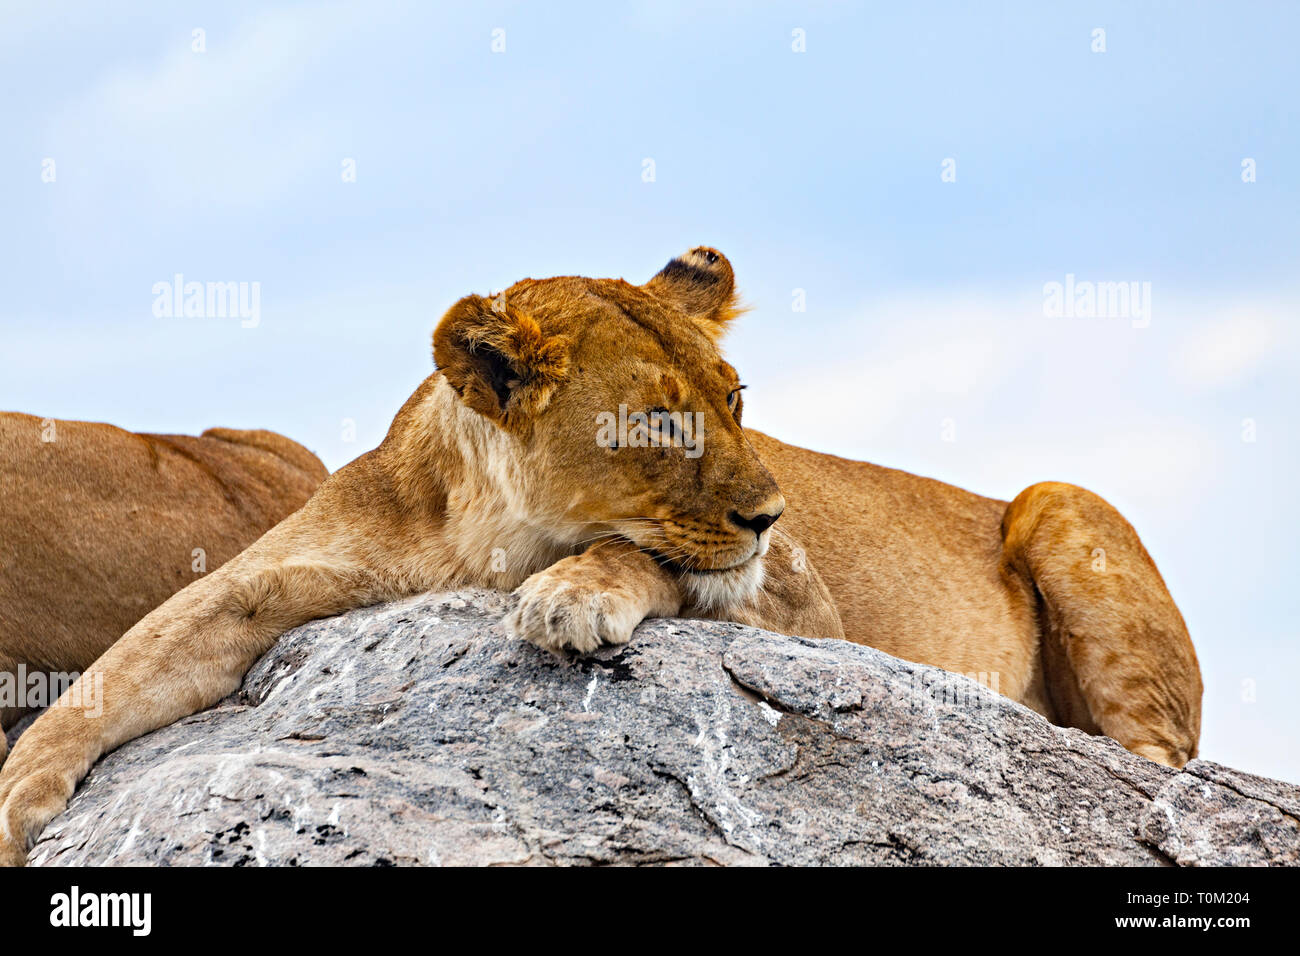 Lion On Rock Relaxing Stock Photo